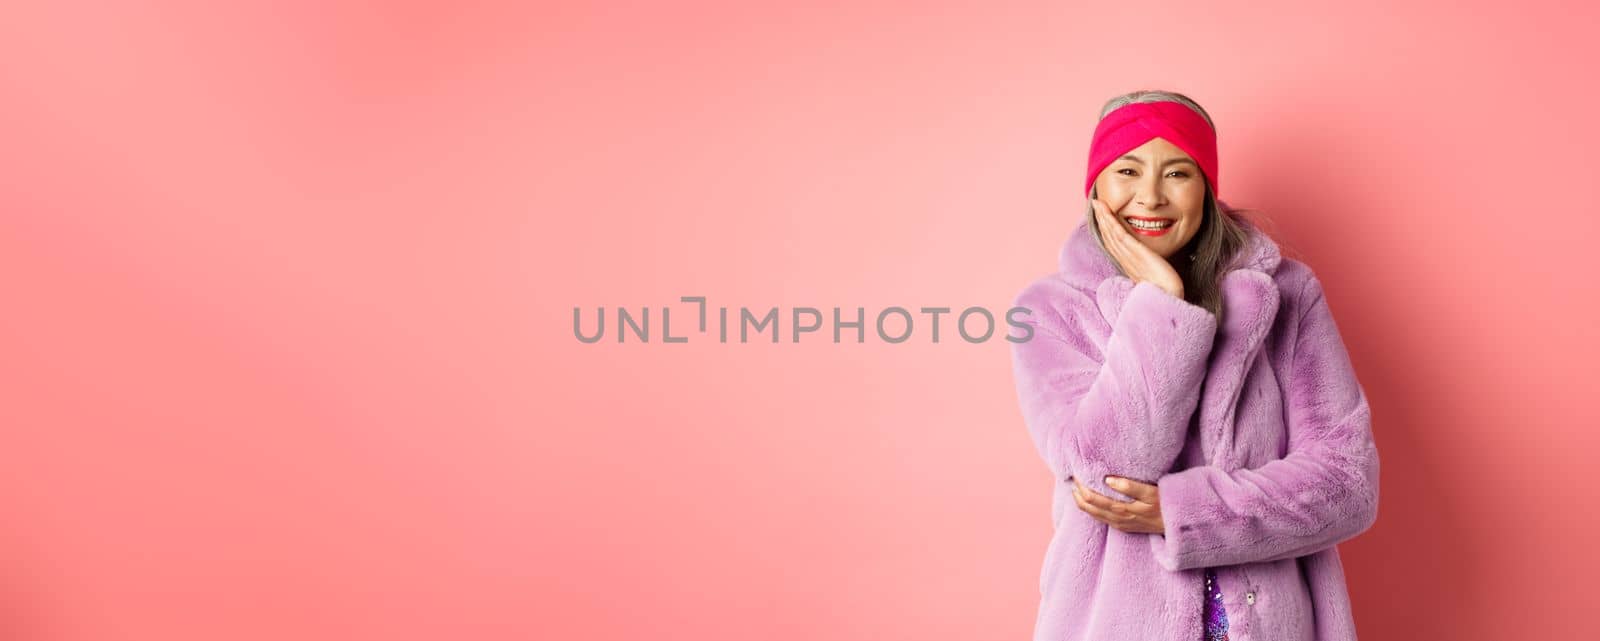 Fashion and shopping. Beautiful and romantic asian mature woman looking caring and heartfelt at camera, smiling happy, standing over pink background.